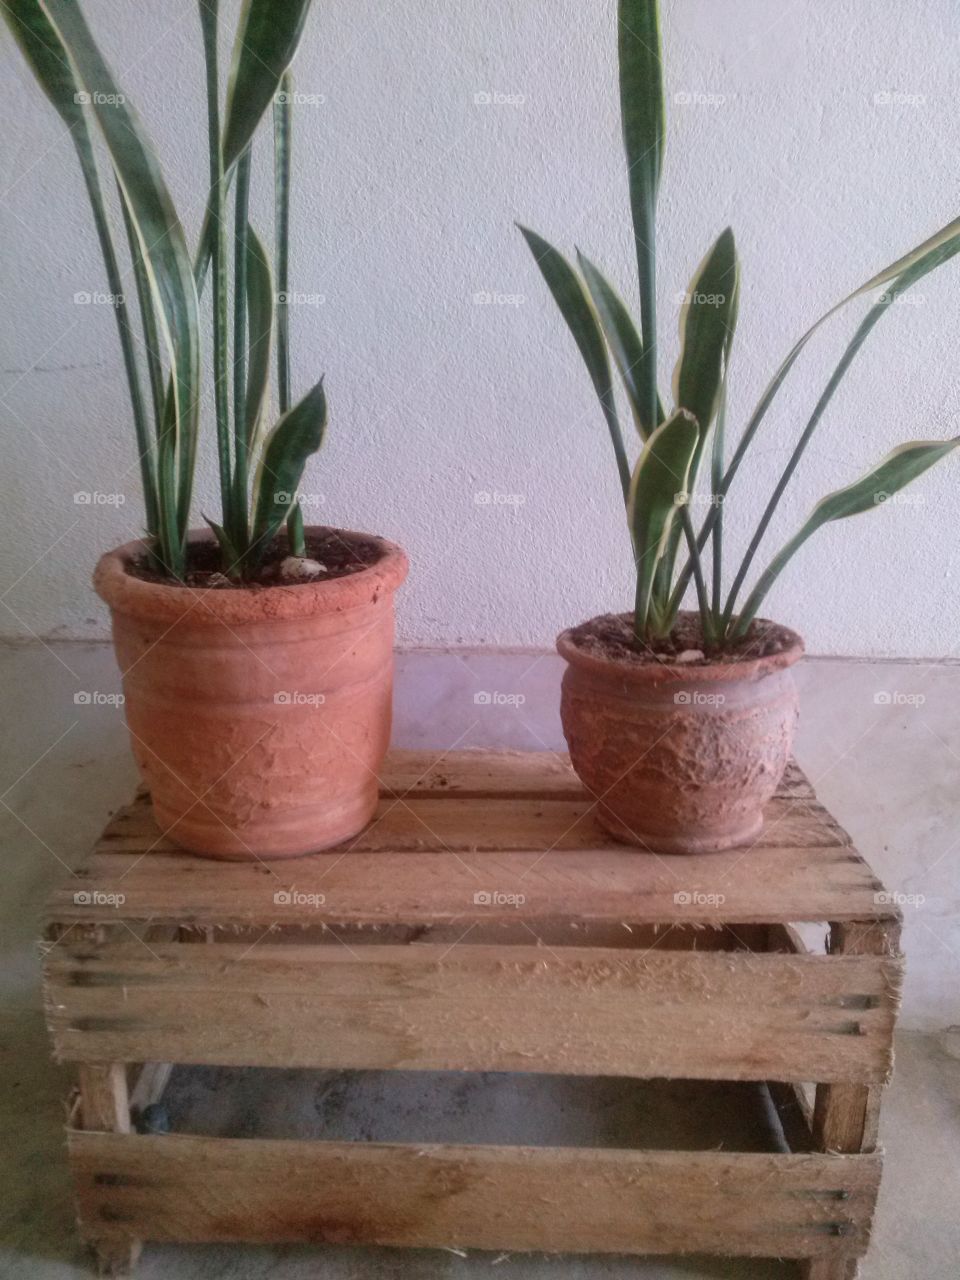 House plants and pots